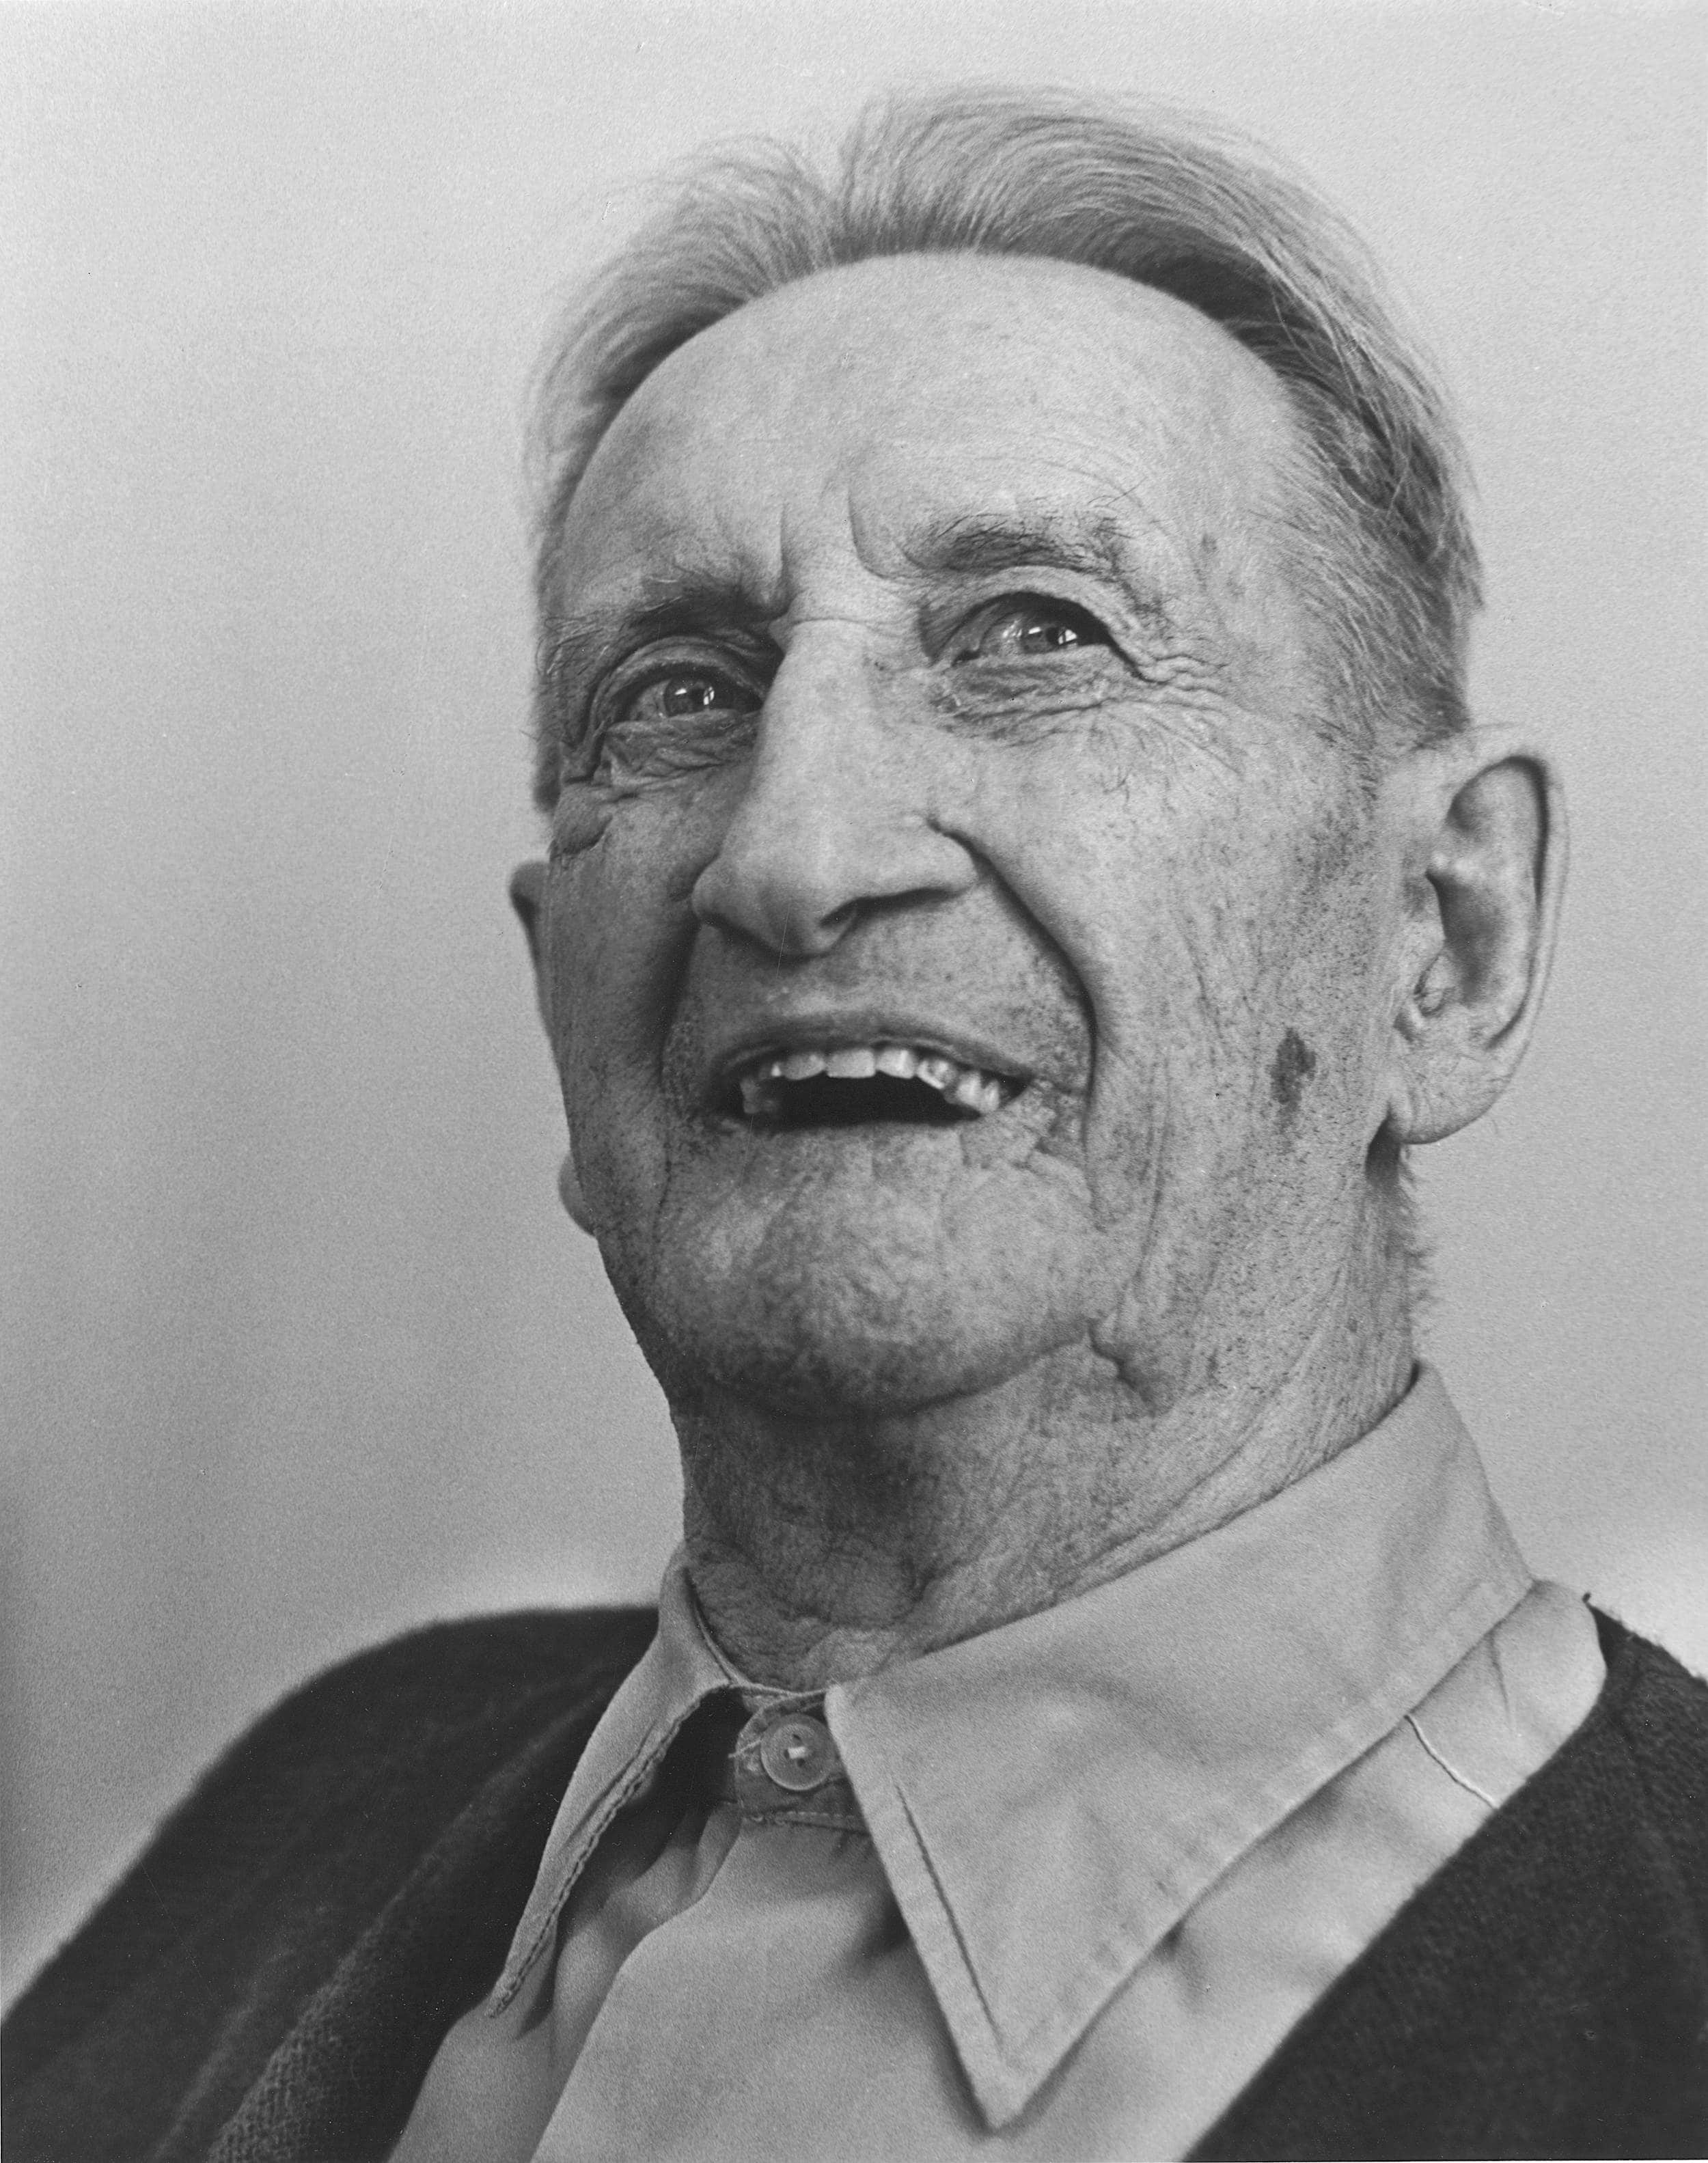 Black and white close-up photo of elderly man wearing shirt with top button tied up.